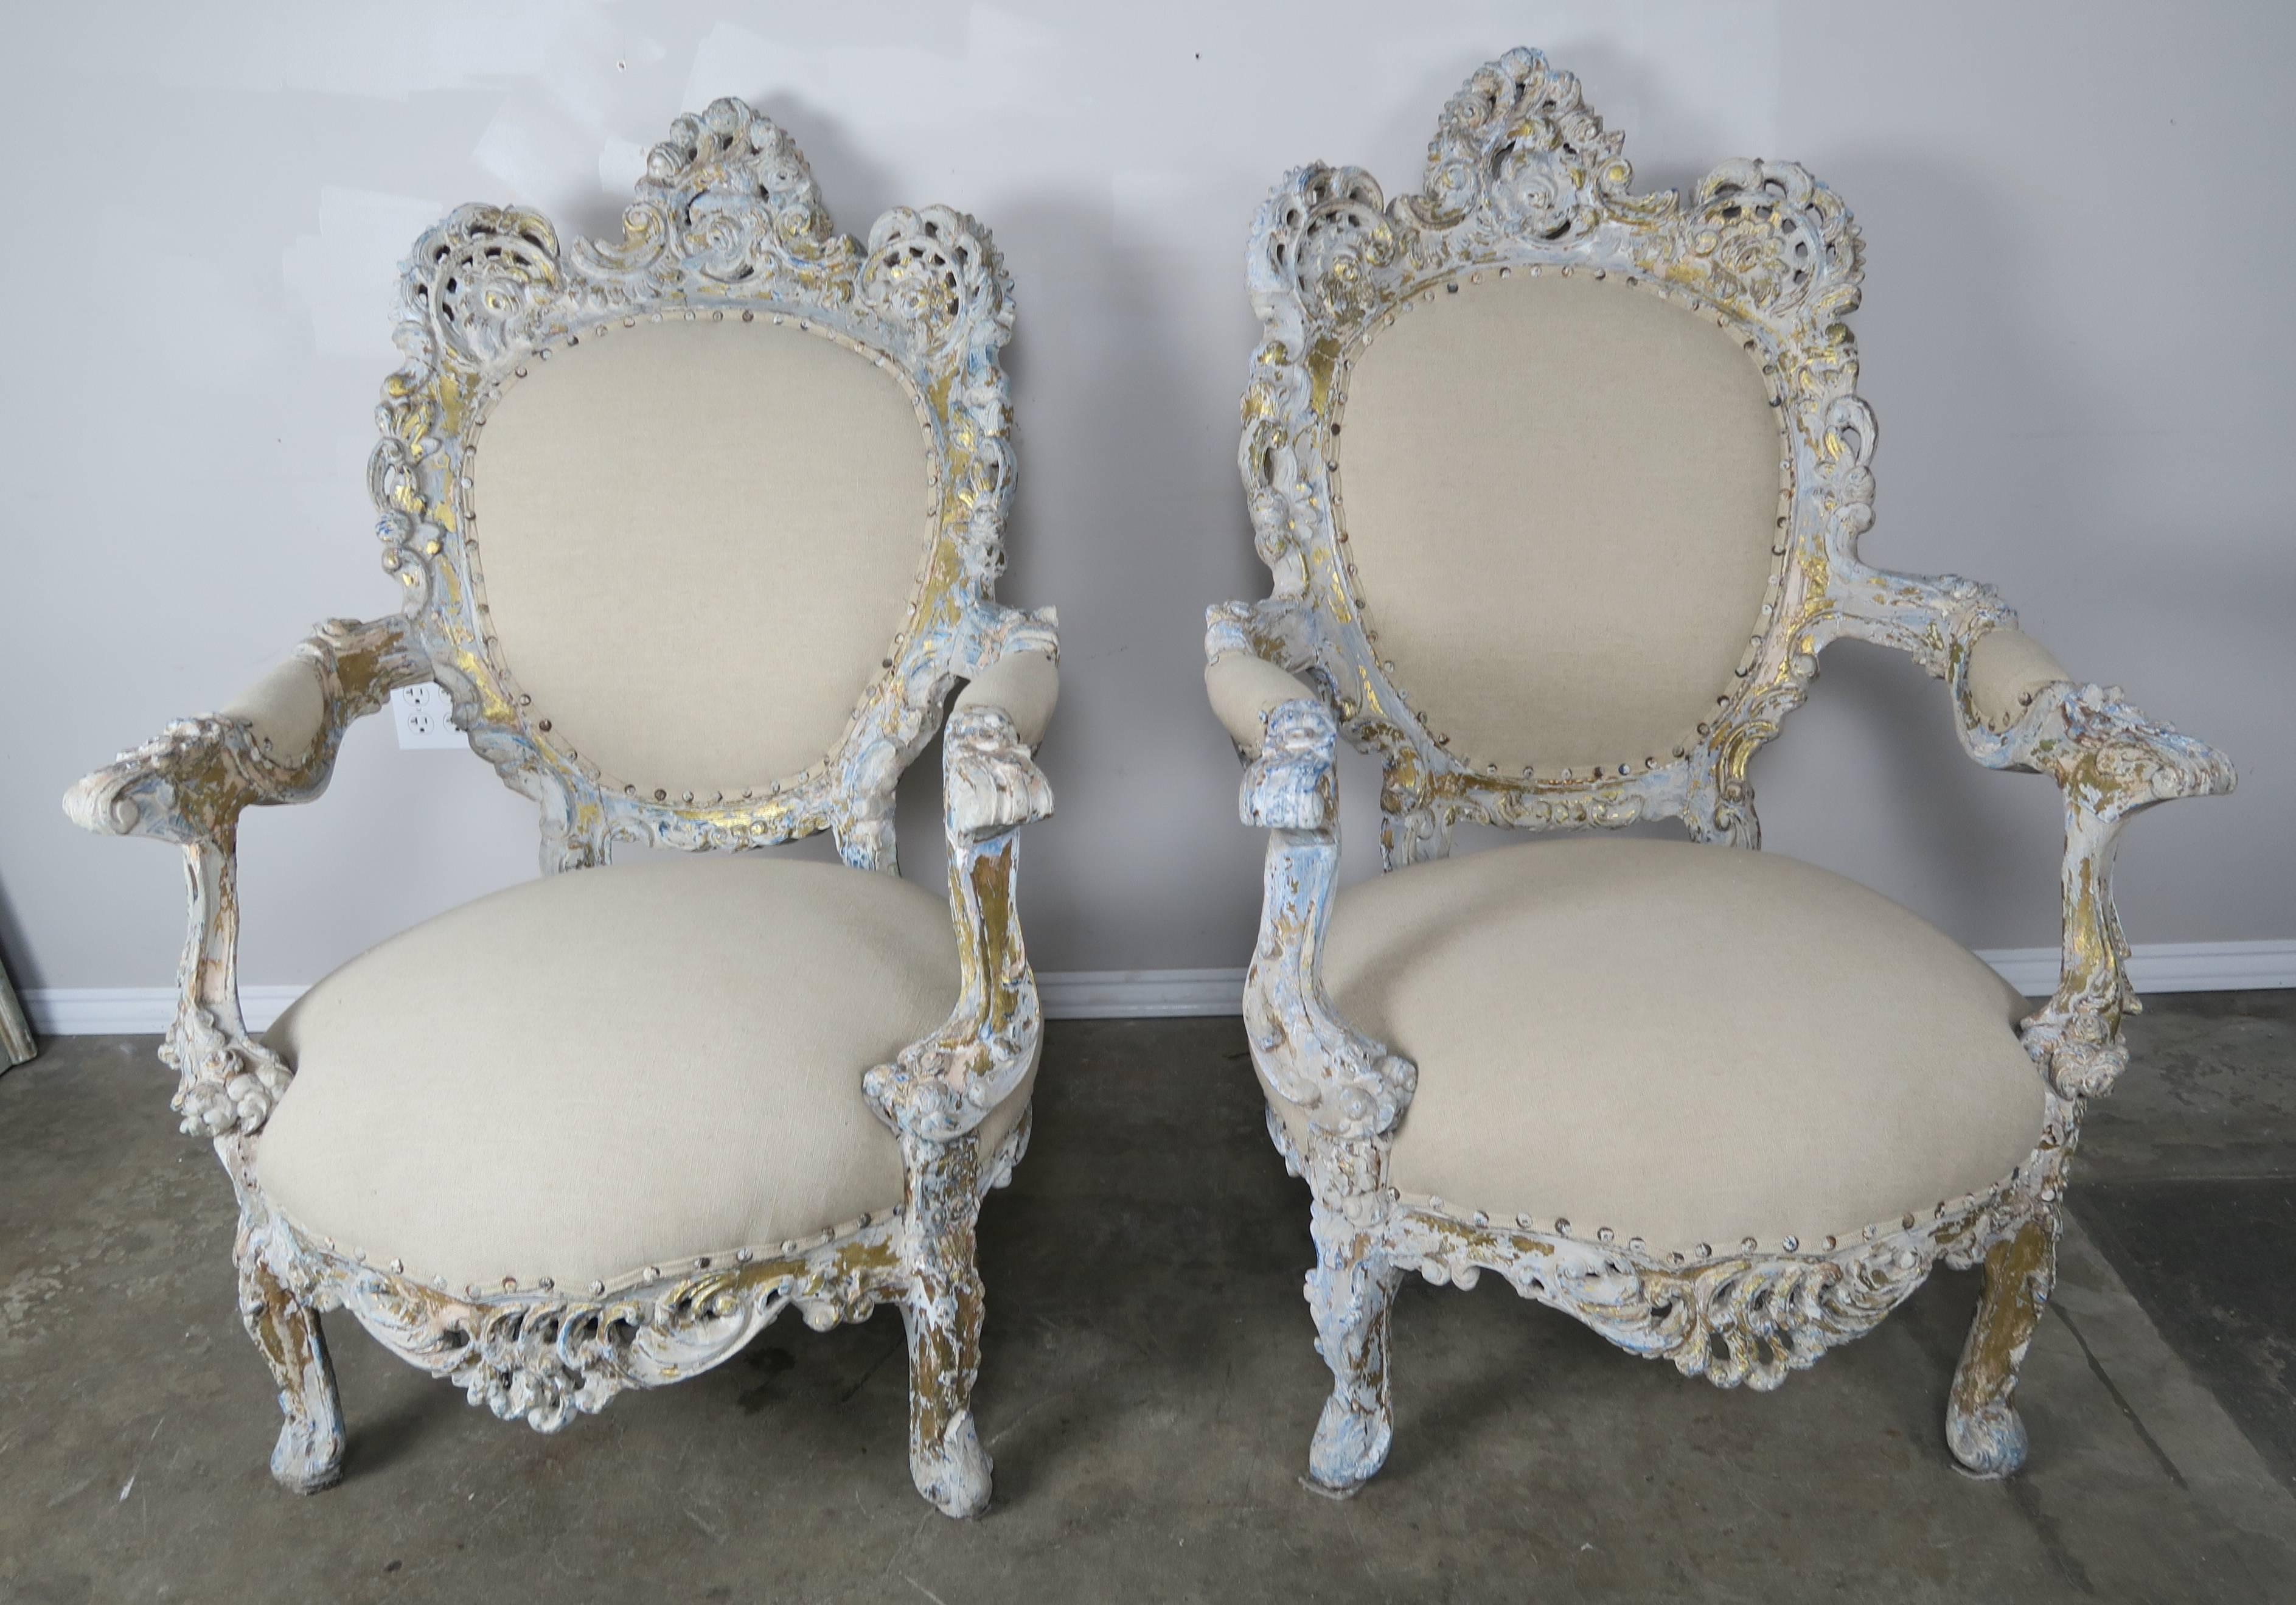 Pair of 19th century Rococo style French painted and parcel-gilt carved wood armchairs newly upholstered in a Pindler & Pindler 100% linen with the original spaced nailhead trim detail.